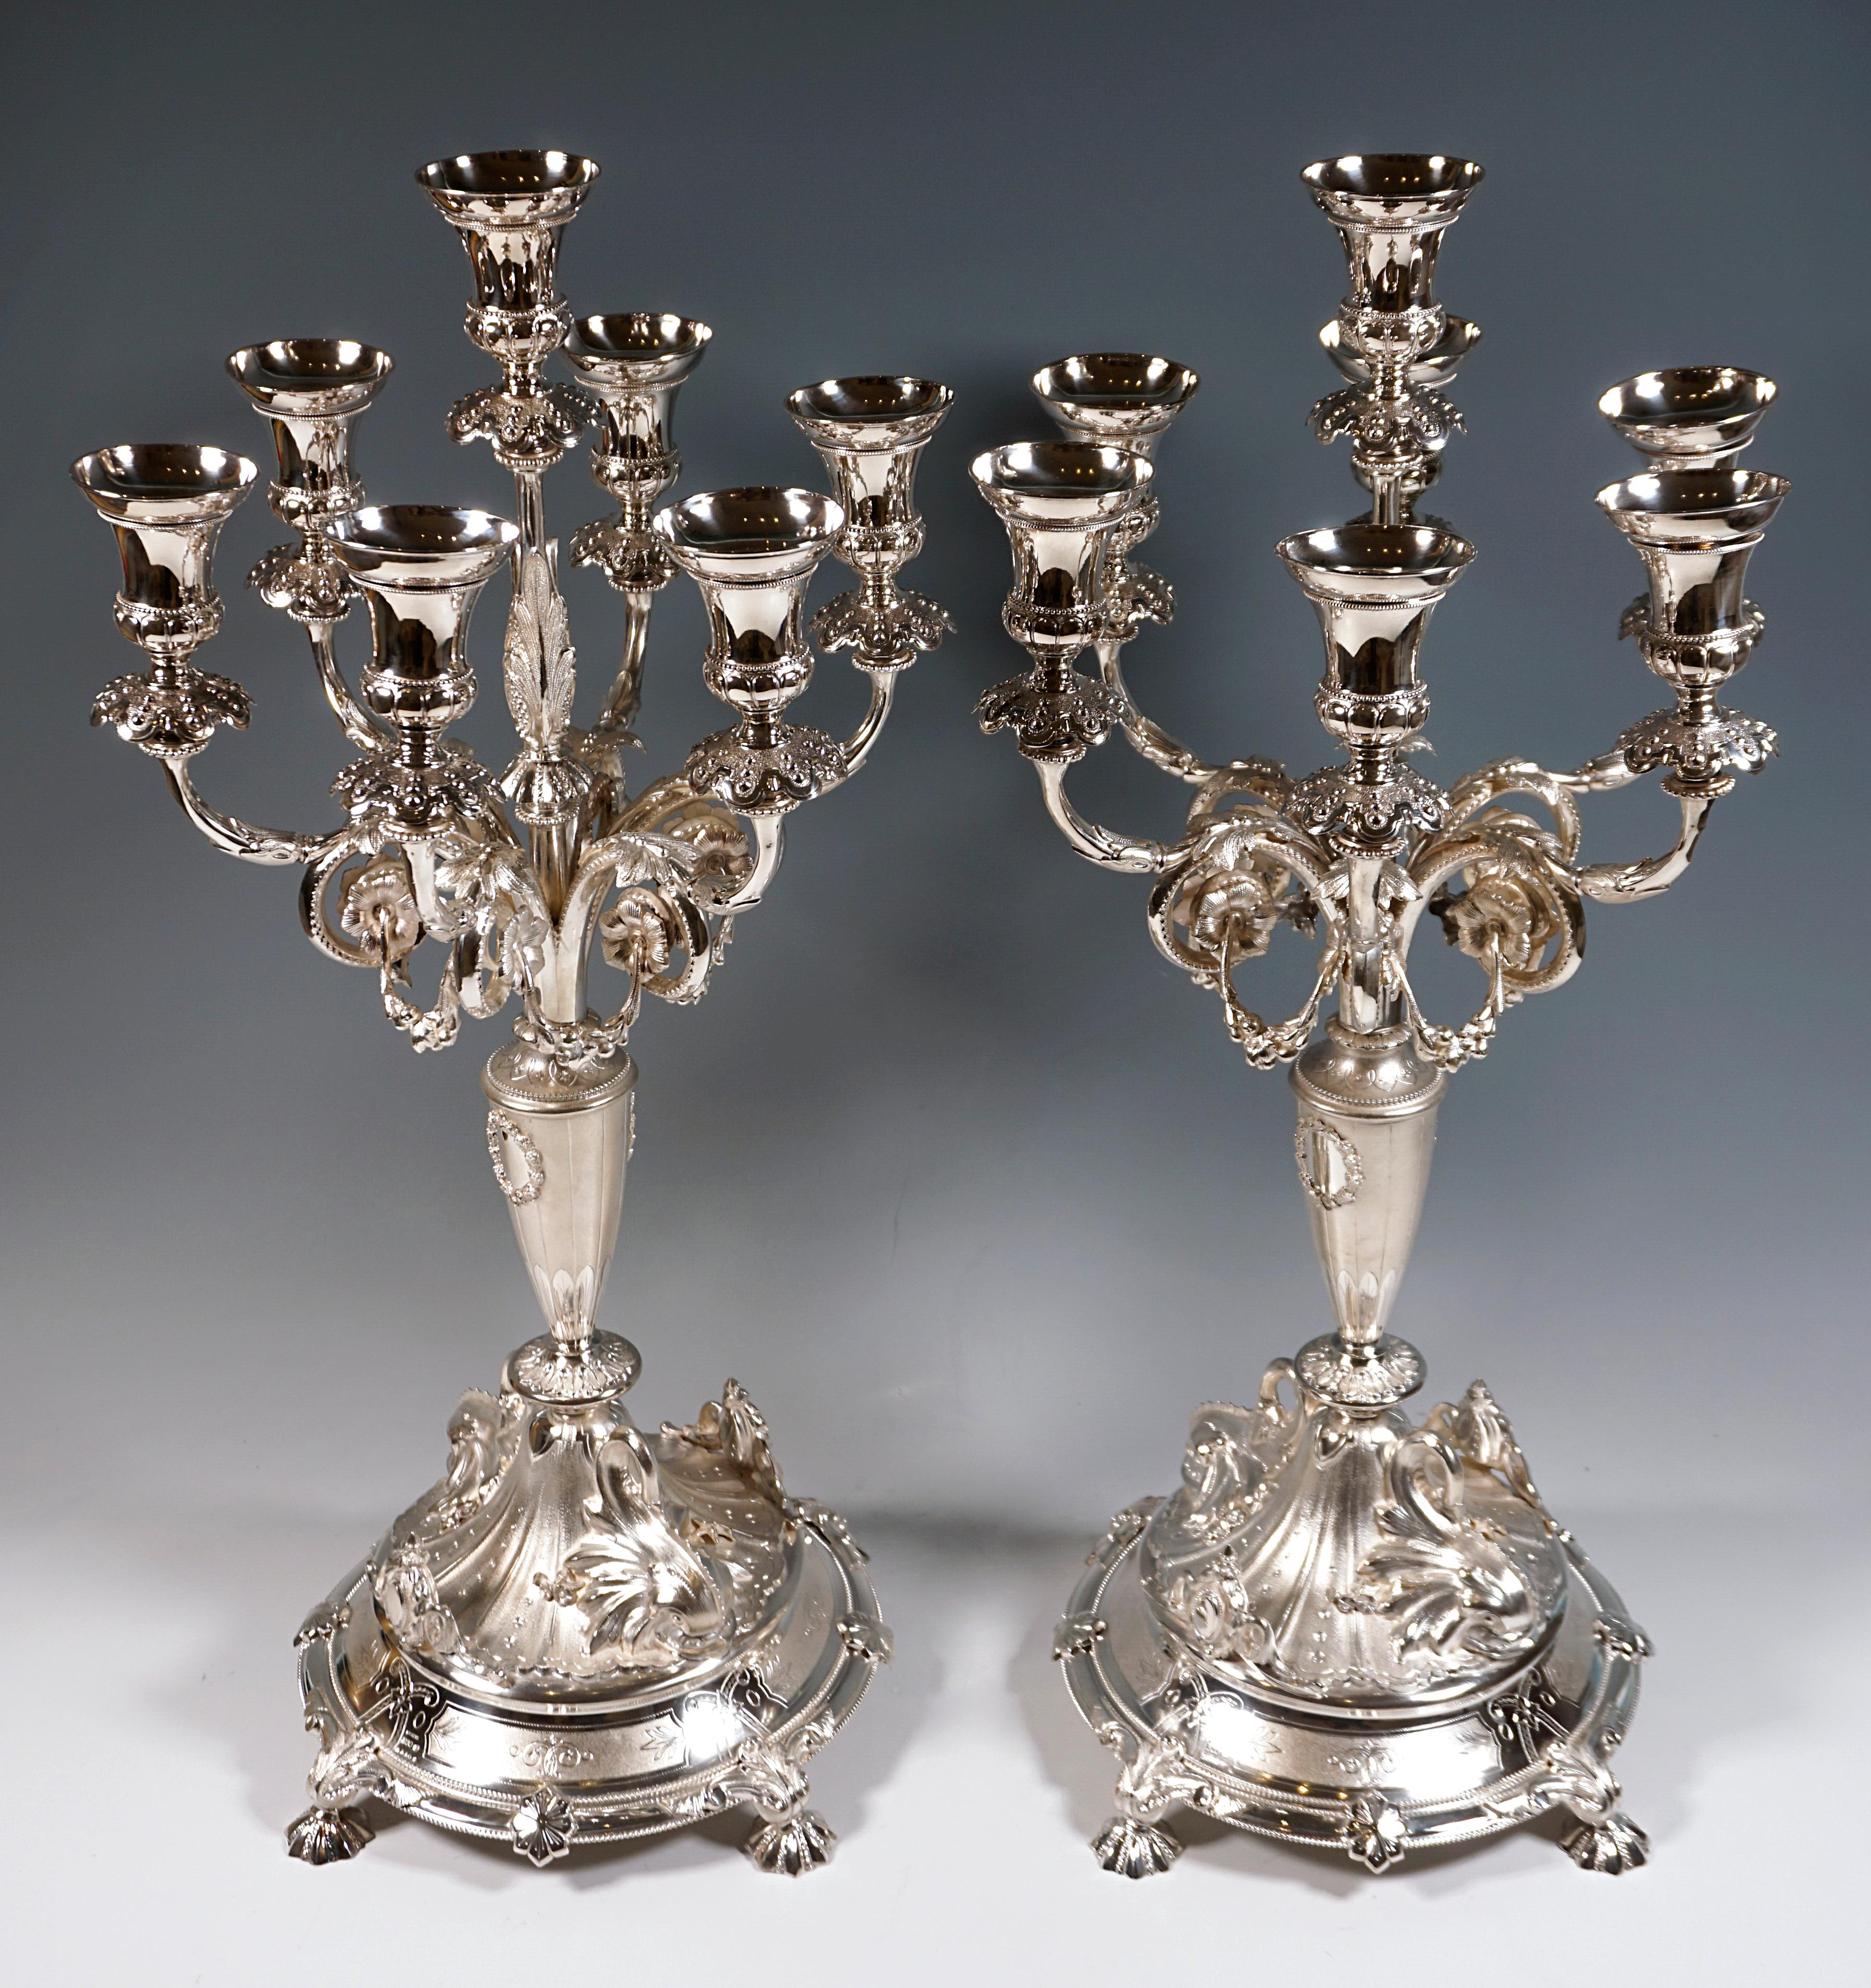 Pair of festive silver girandoles on projecting circular stand with four star-shaped feet, raised two-tiered foot with applied dolphins and cartouches, baluster-shaped shaft with six candelabrum arms with down-turned volutes decorated with flowers